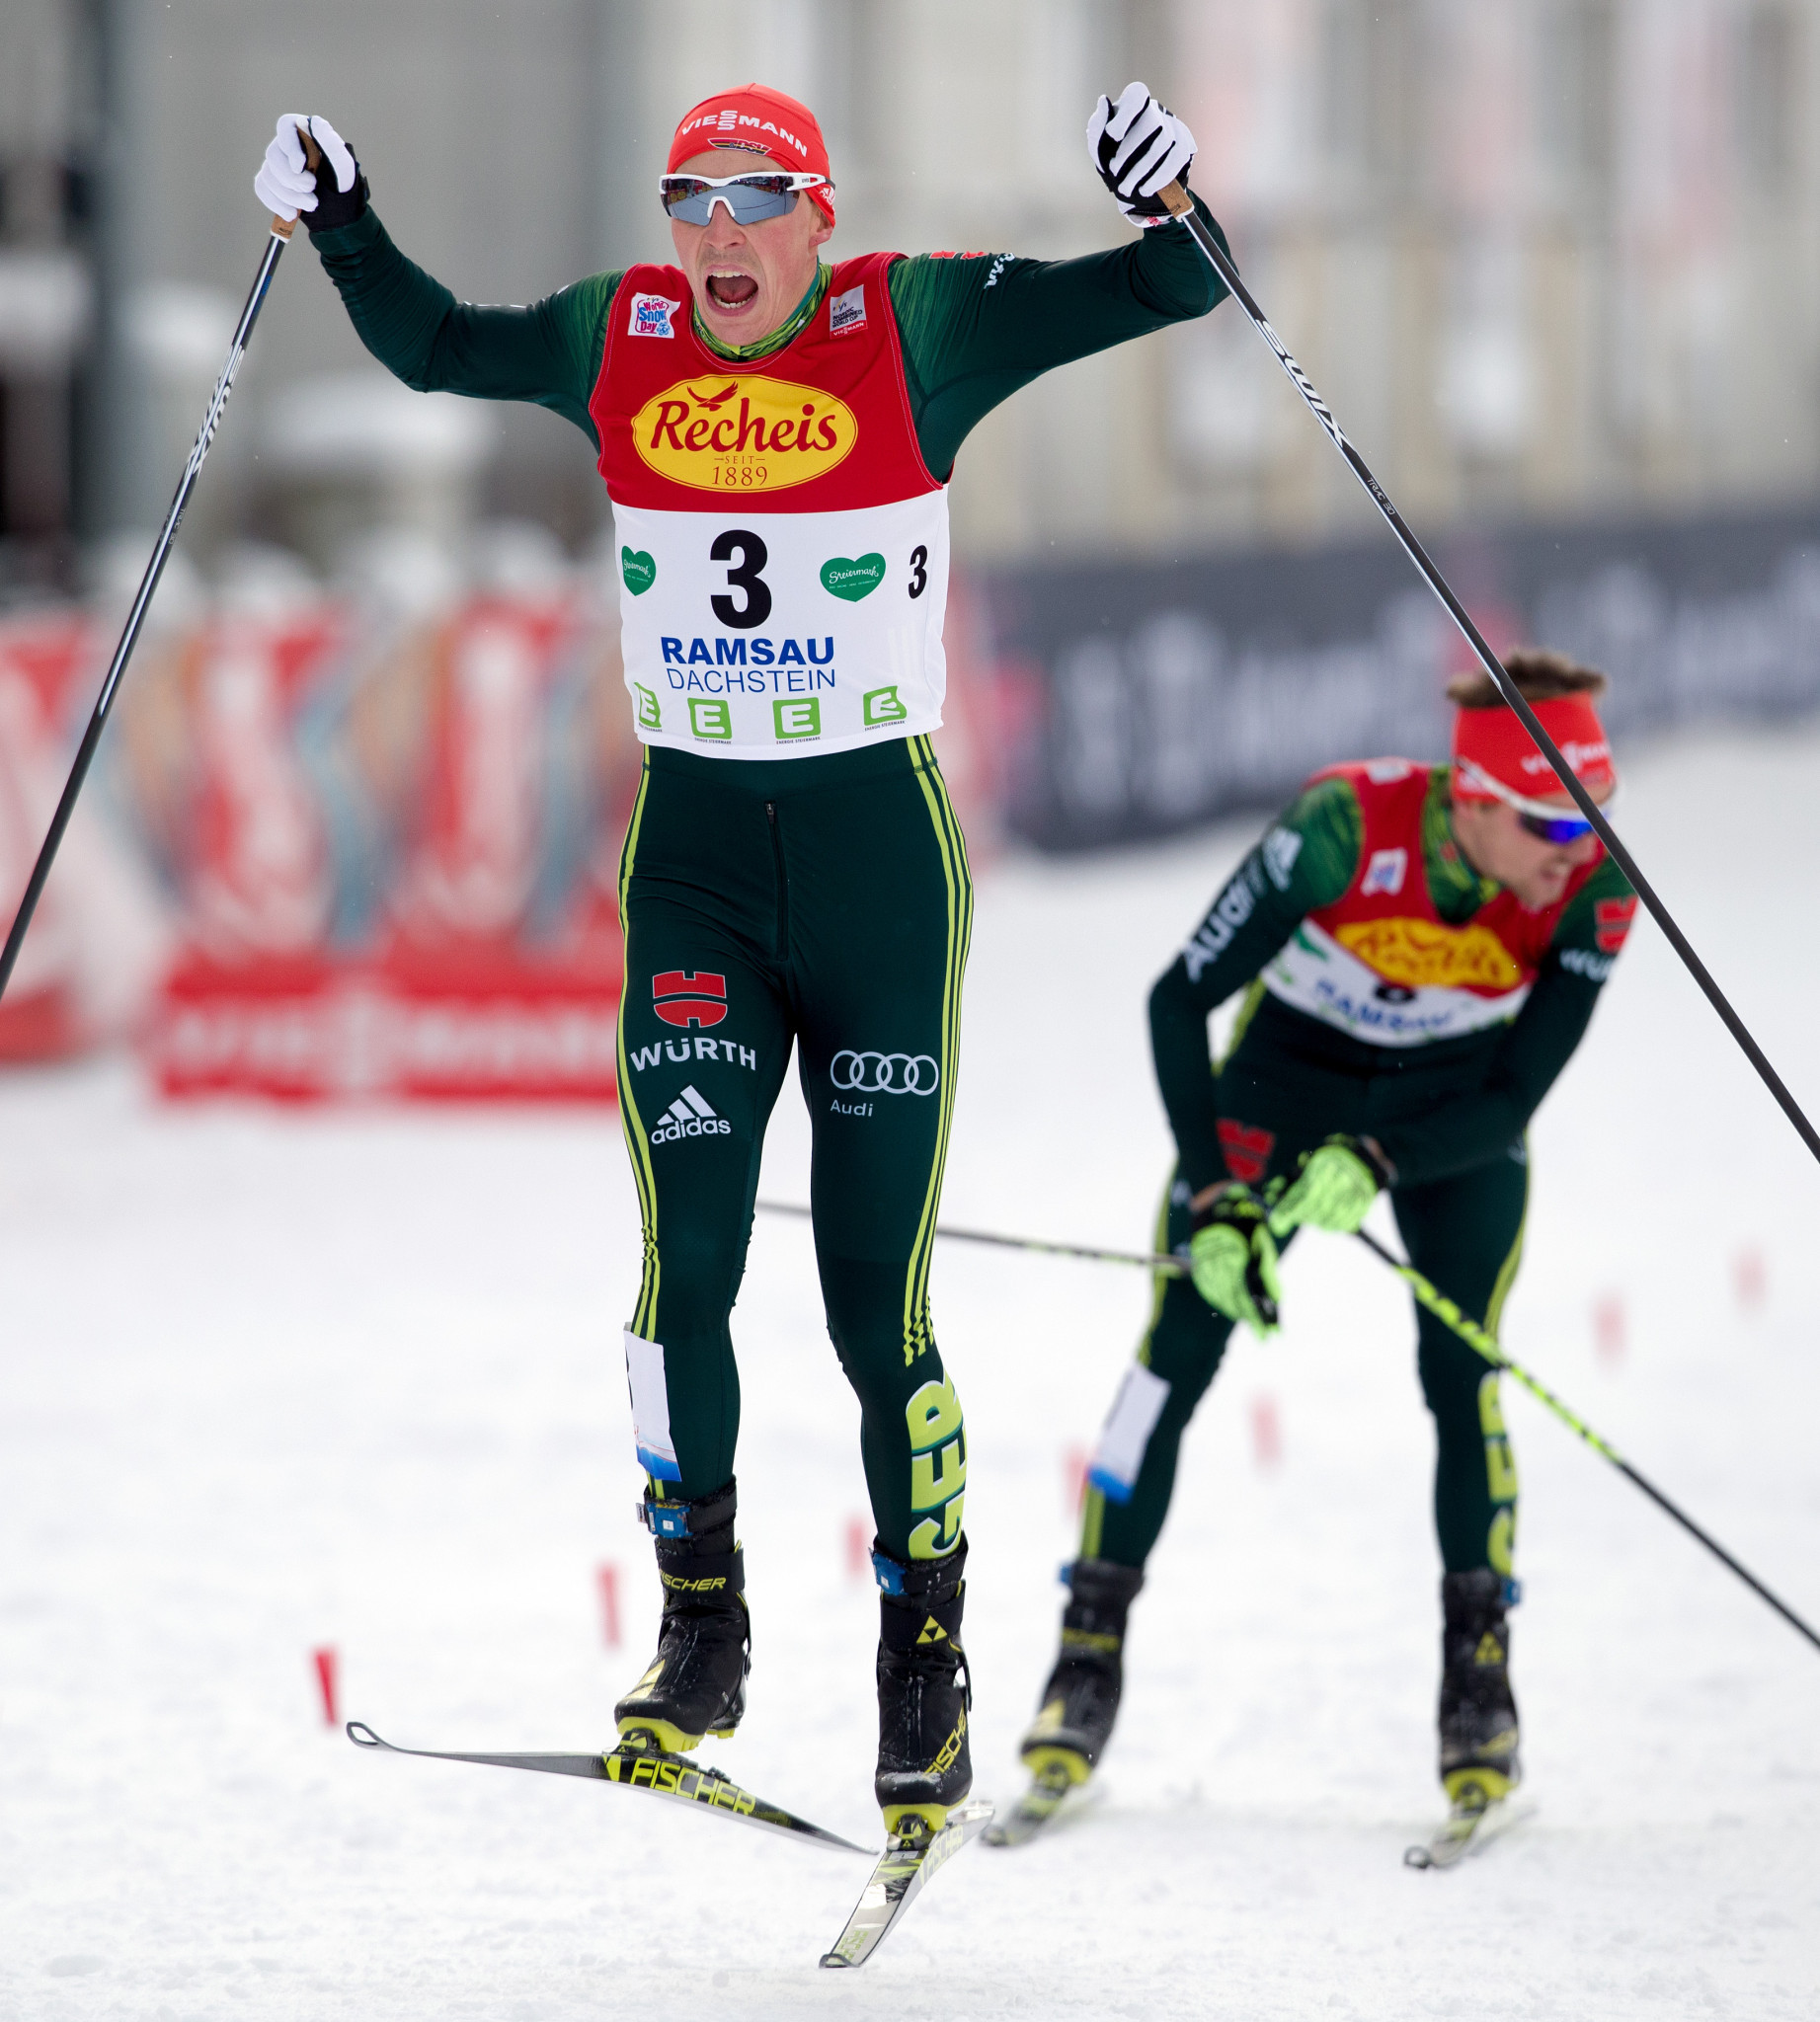 Frenzel returns to winning ways at Nordic Combined World Cup in Ramsau